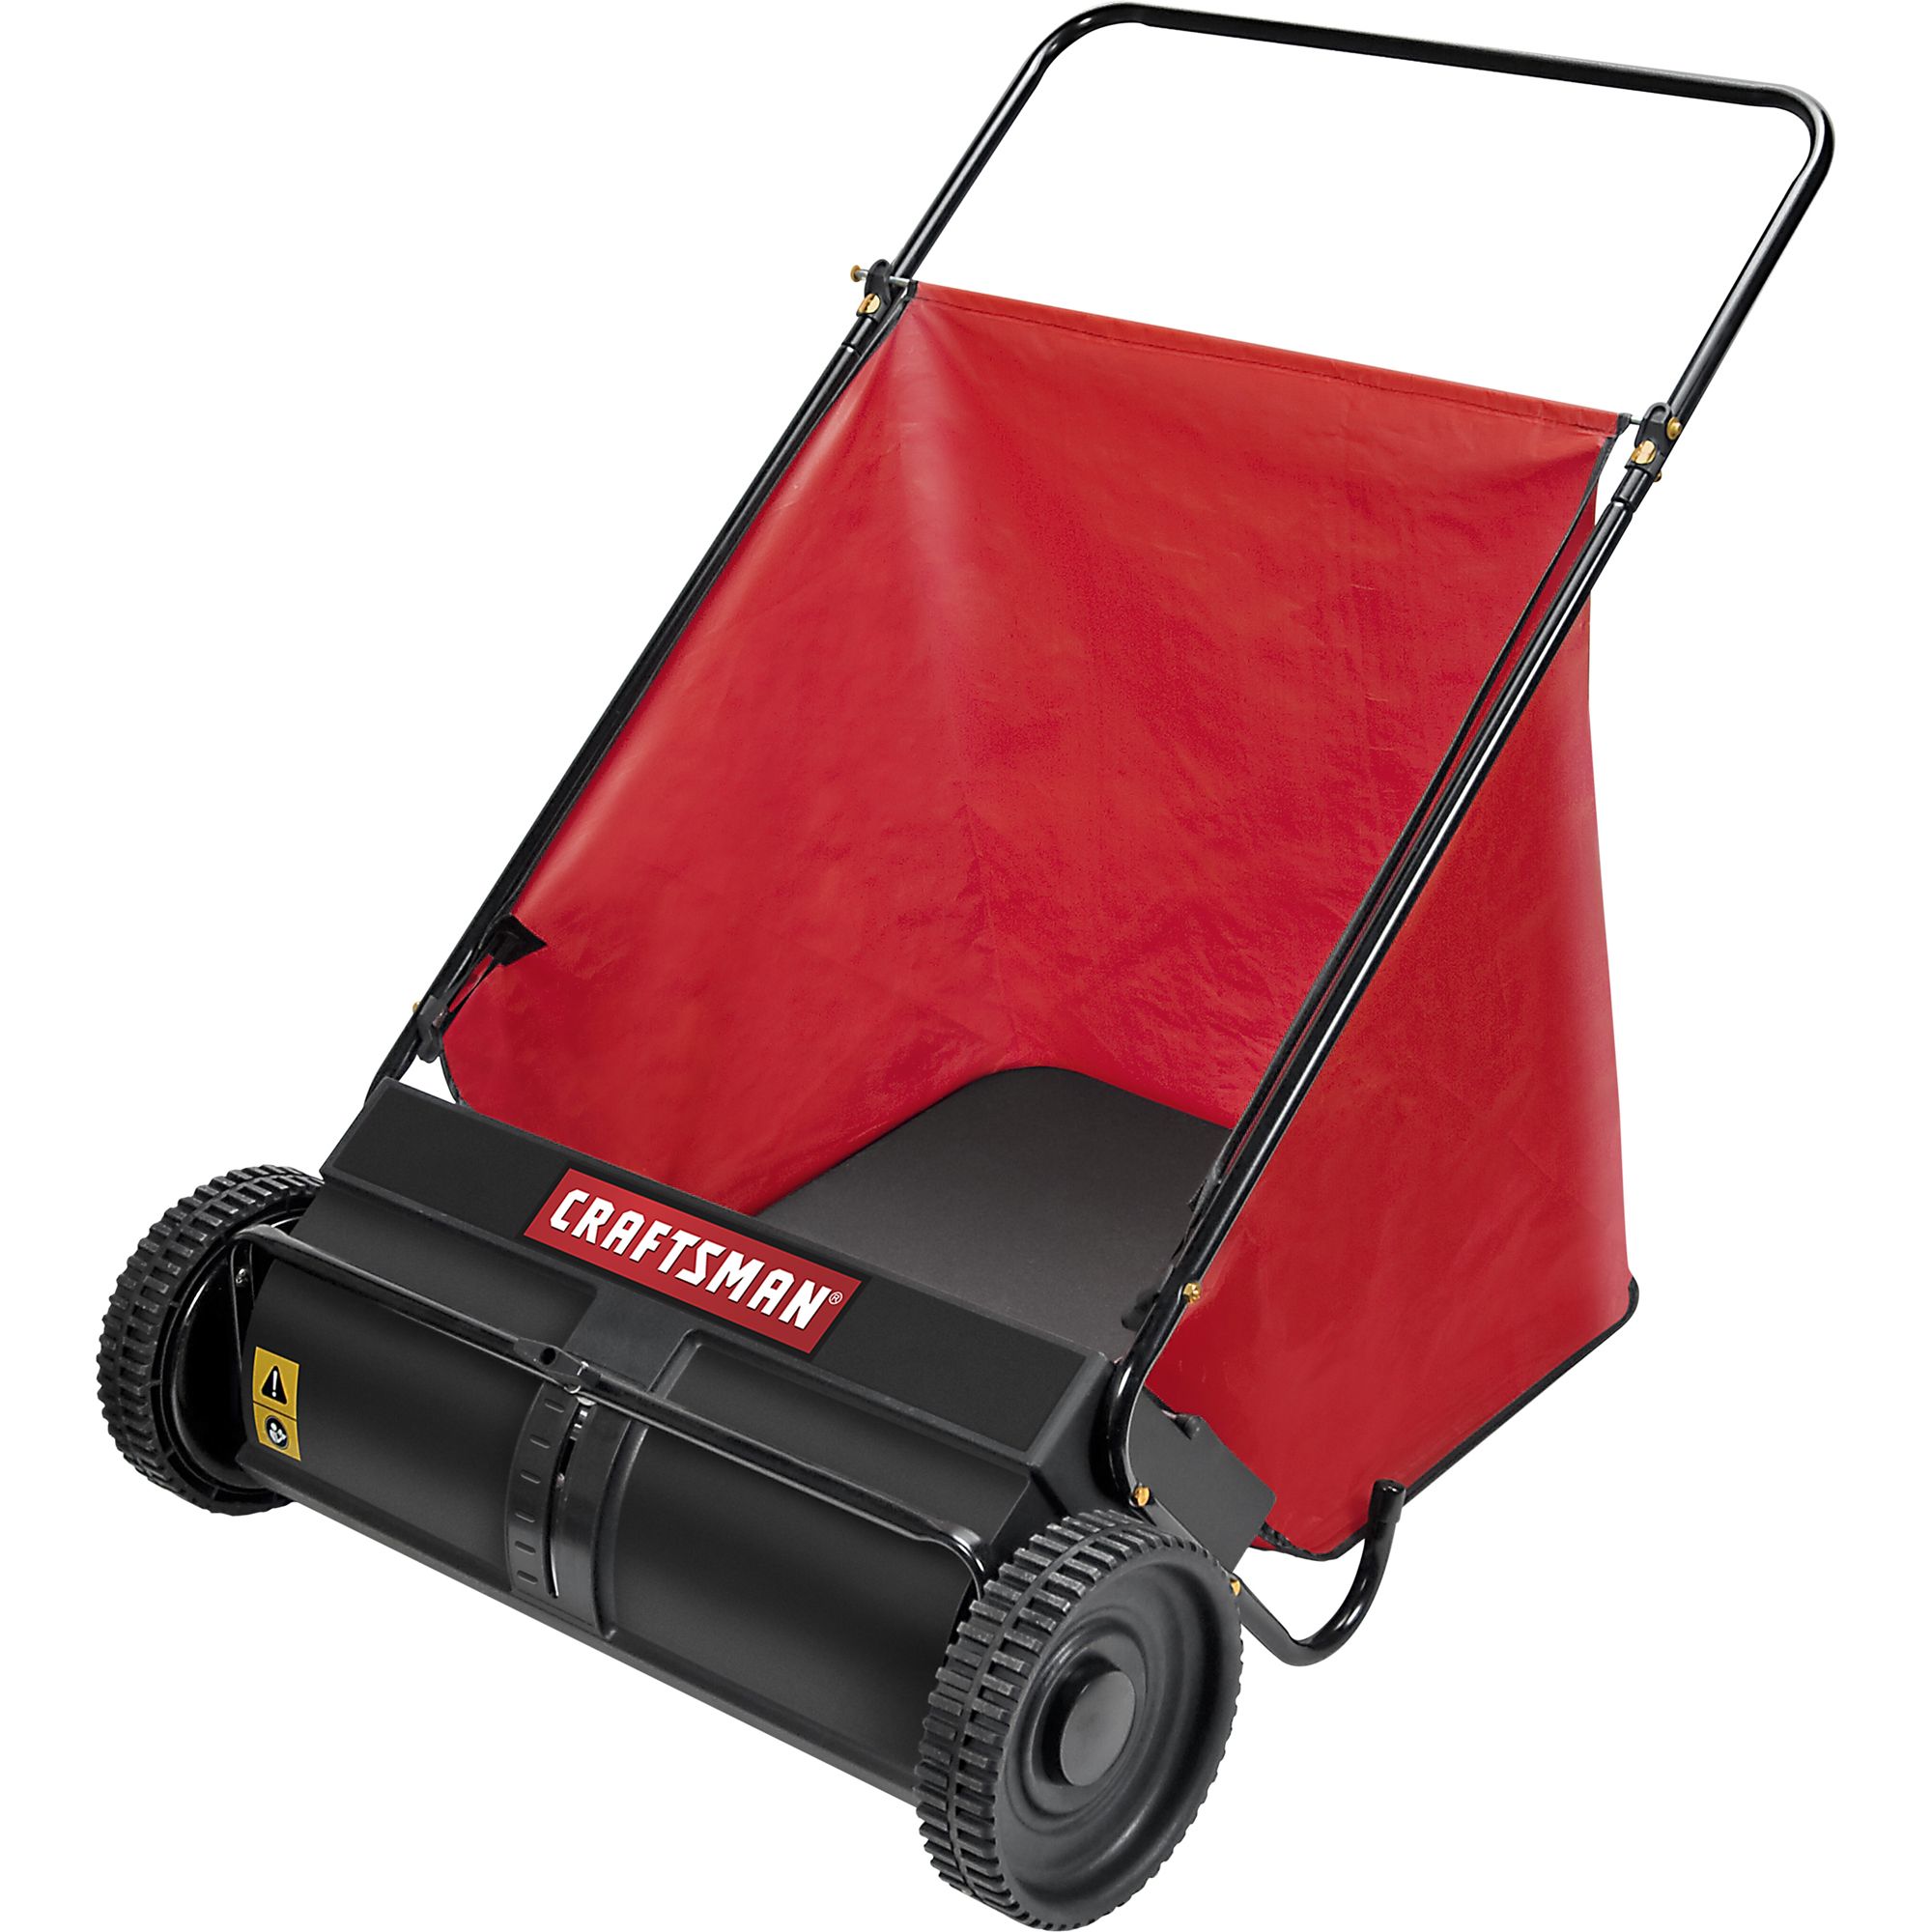 Official Craftsman Lawn Sweeper Parts Sears Partsdirect